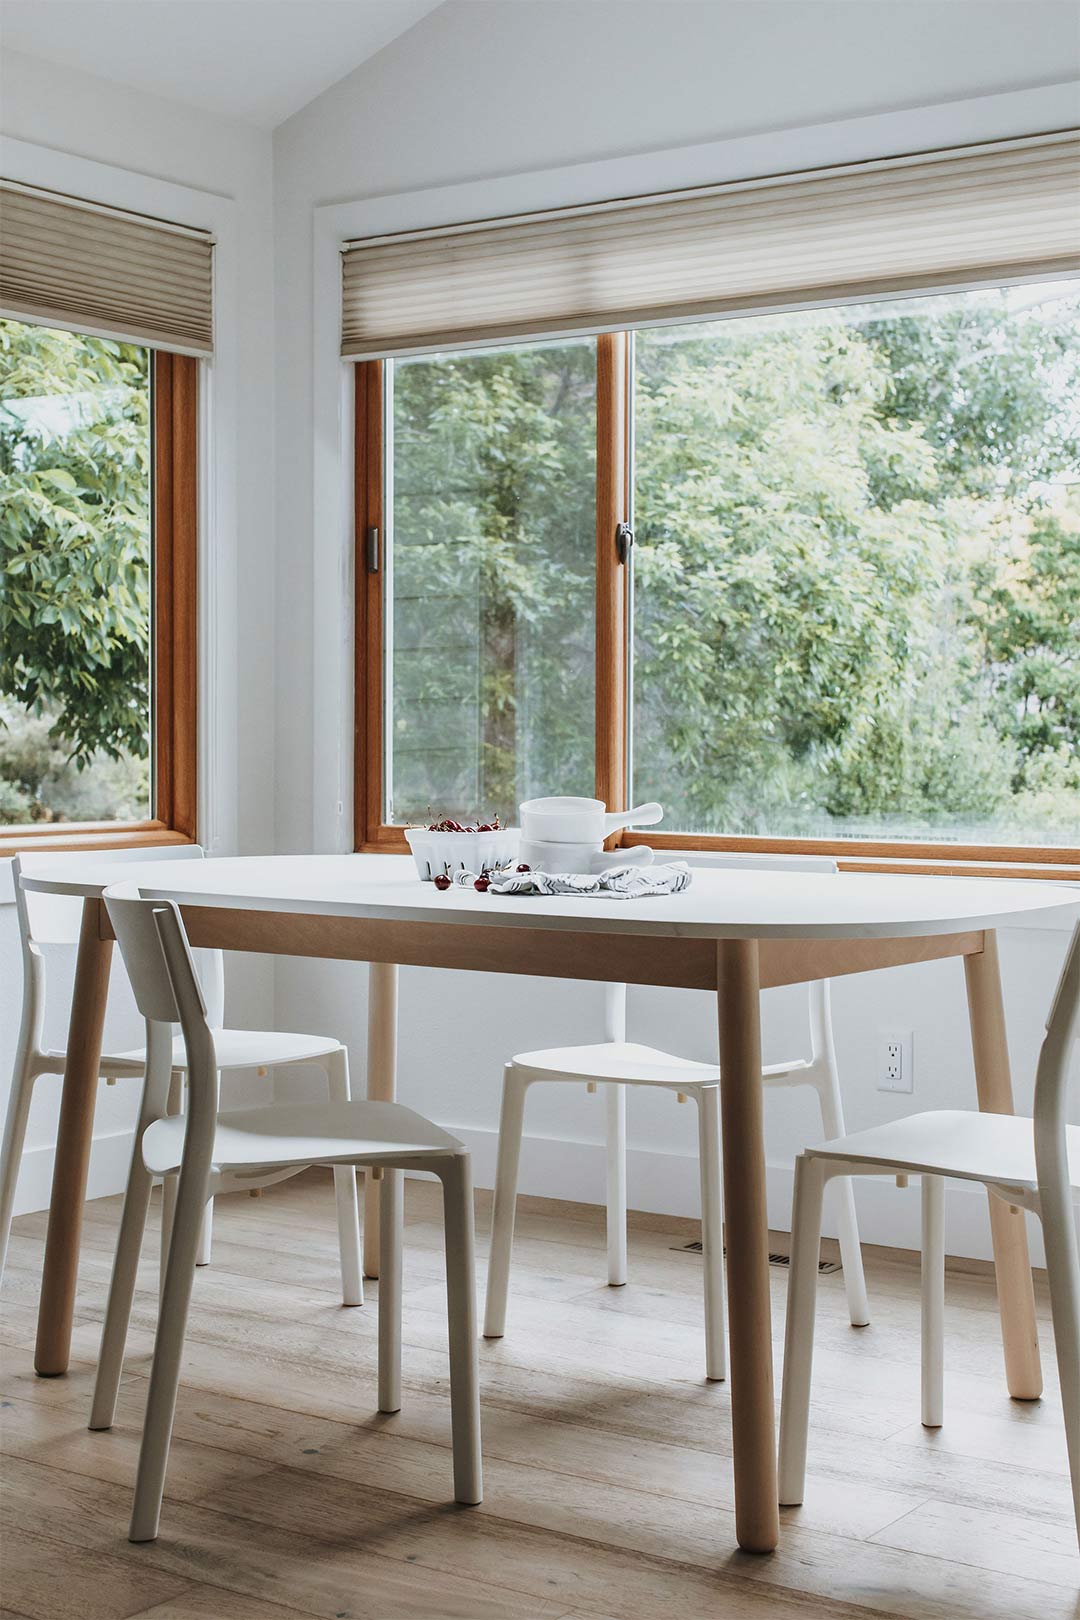  Scandinavian dining table with white modern chairs in a bright dining room designed by J. Reiko Design + Co